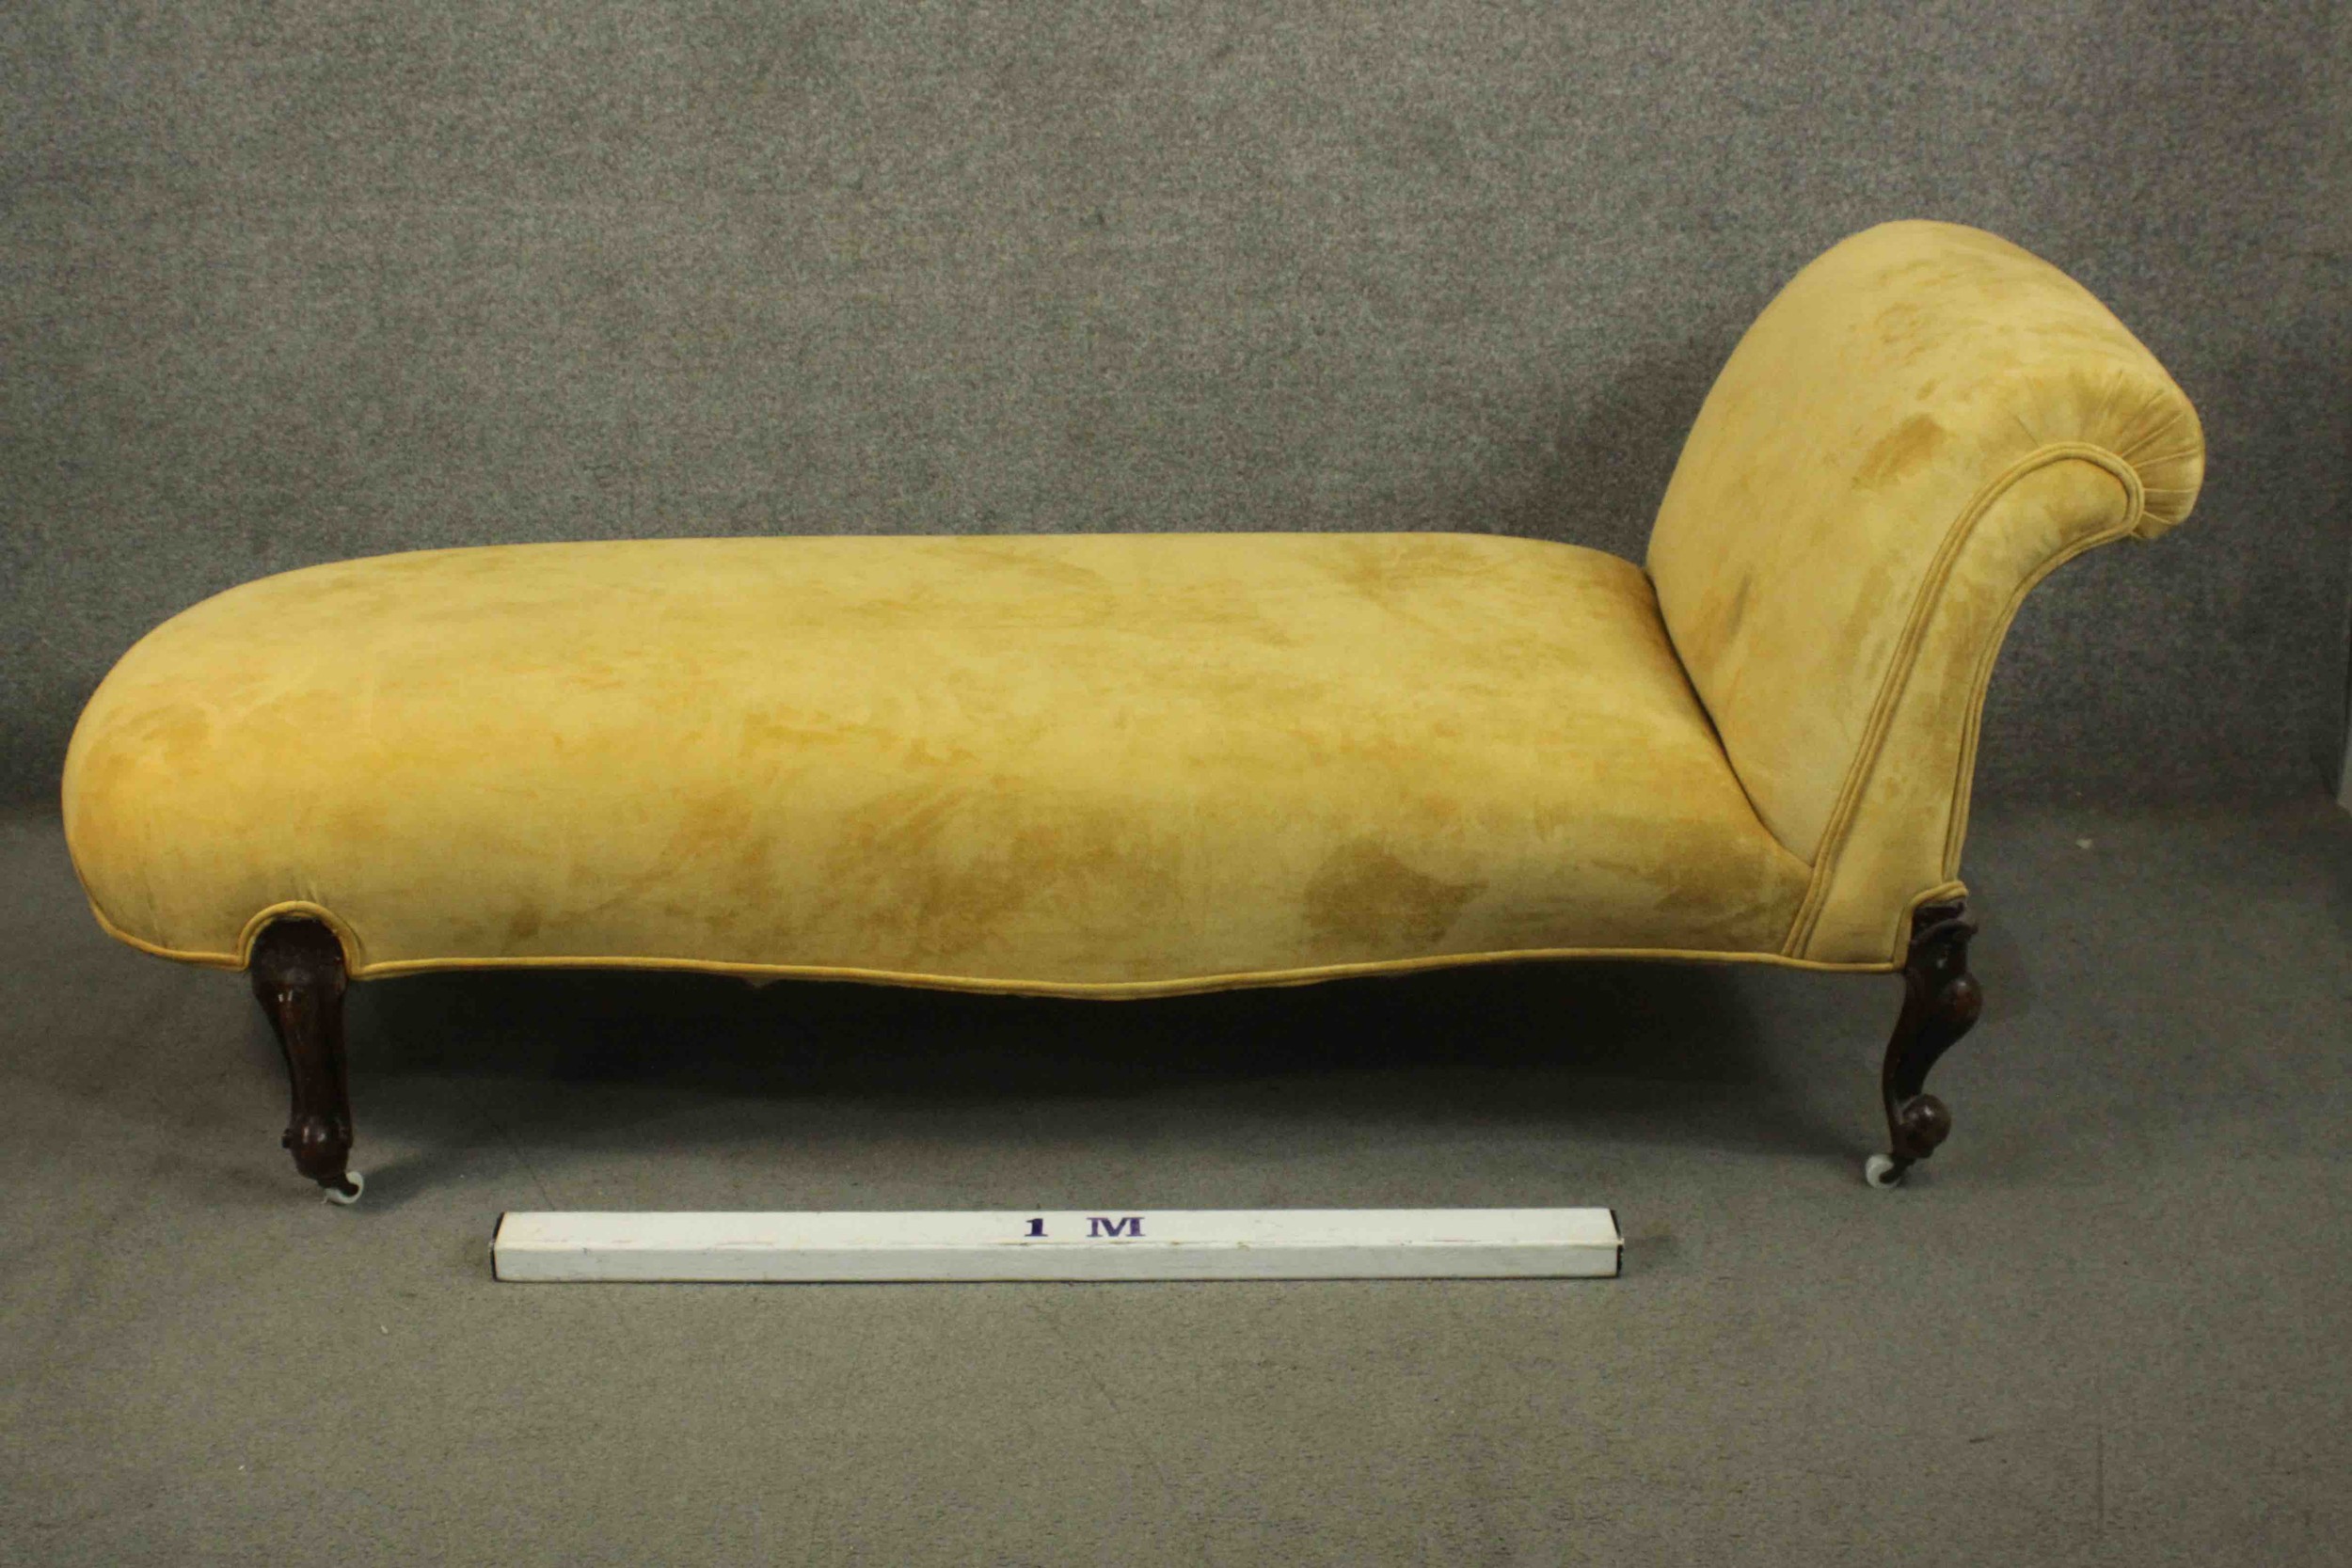 A Victorian mahogany chaise longue, upholstered in yellow fabric, on cabriole legs. H.80 W.100 D. - Image 2 of 7